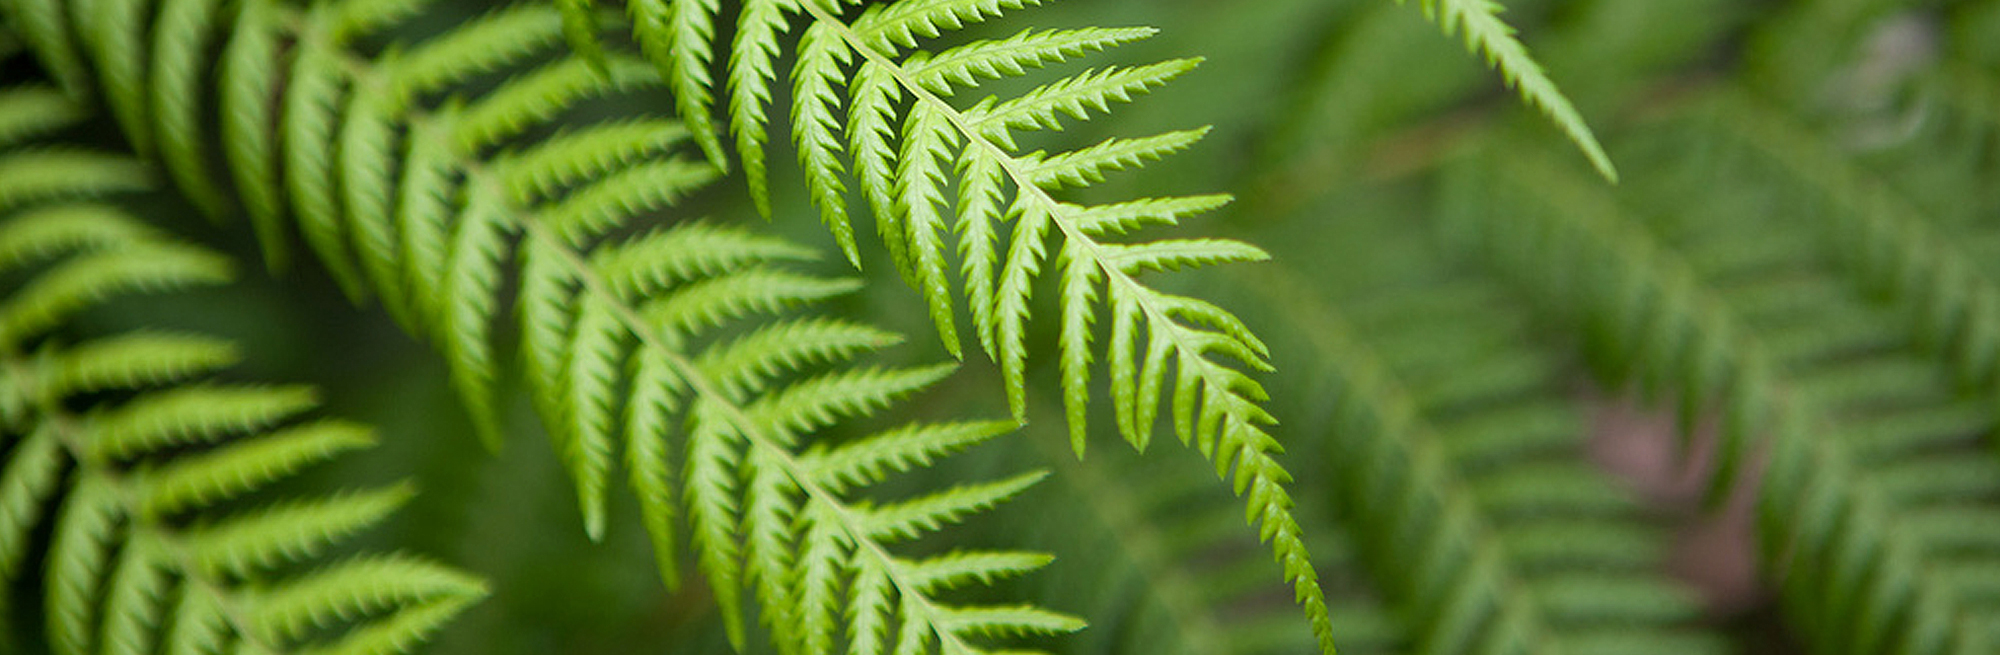 Hobart-Orofacial-Pain-and-Special-Needs-Clinic-Fern-Leaf-Slider2